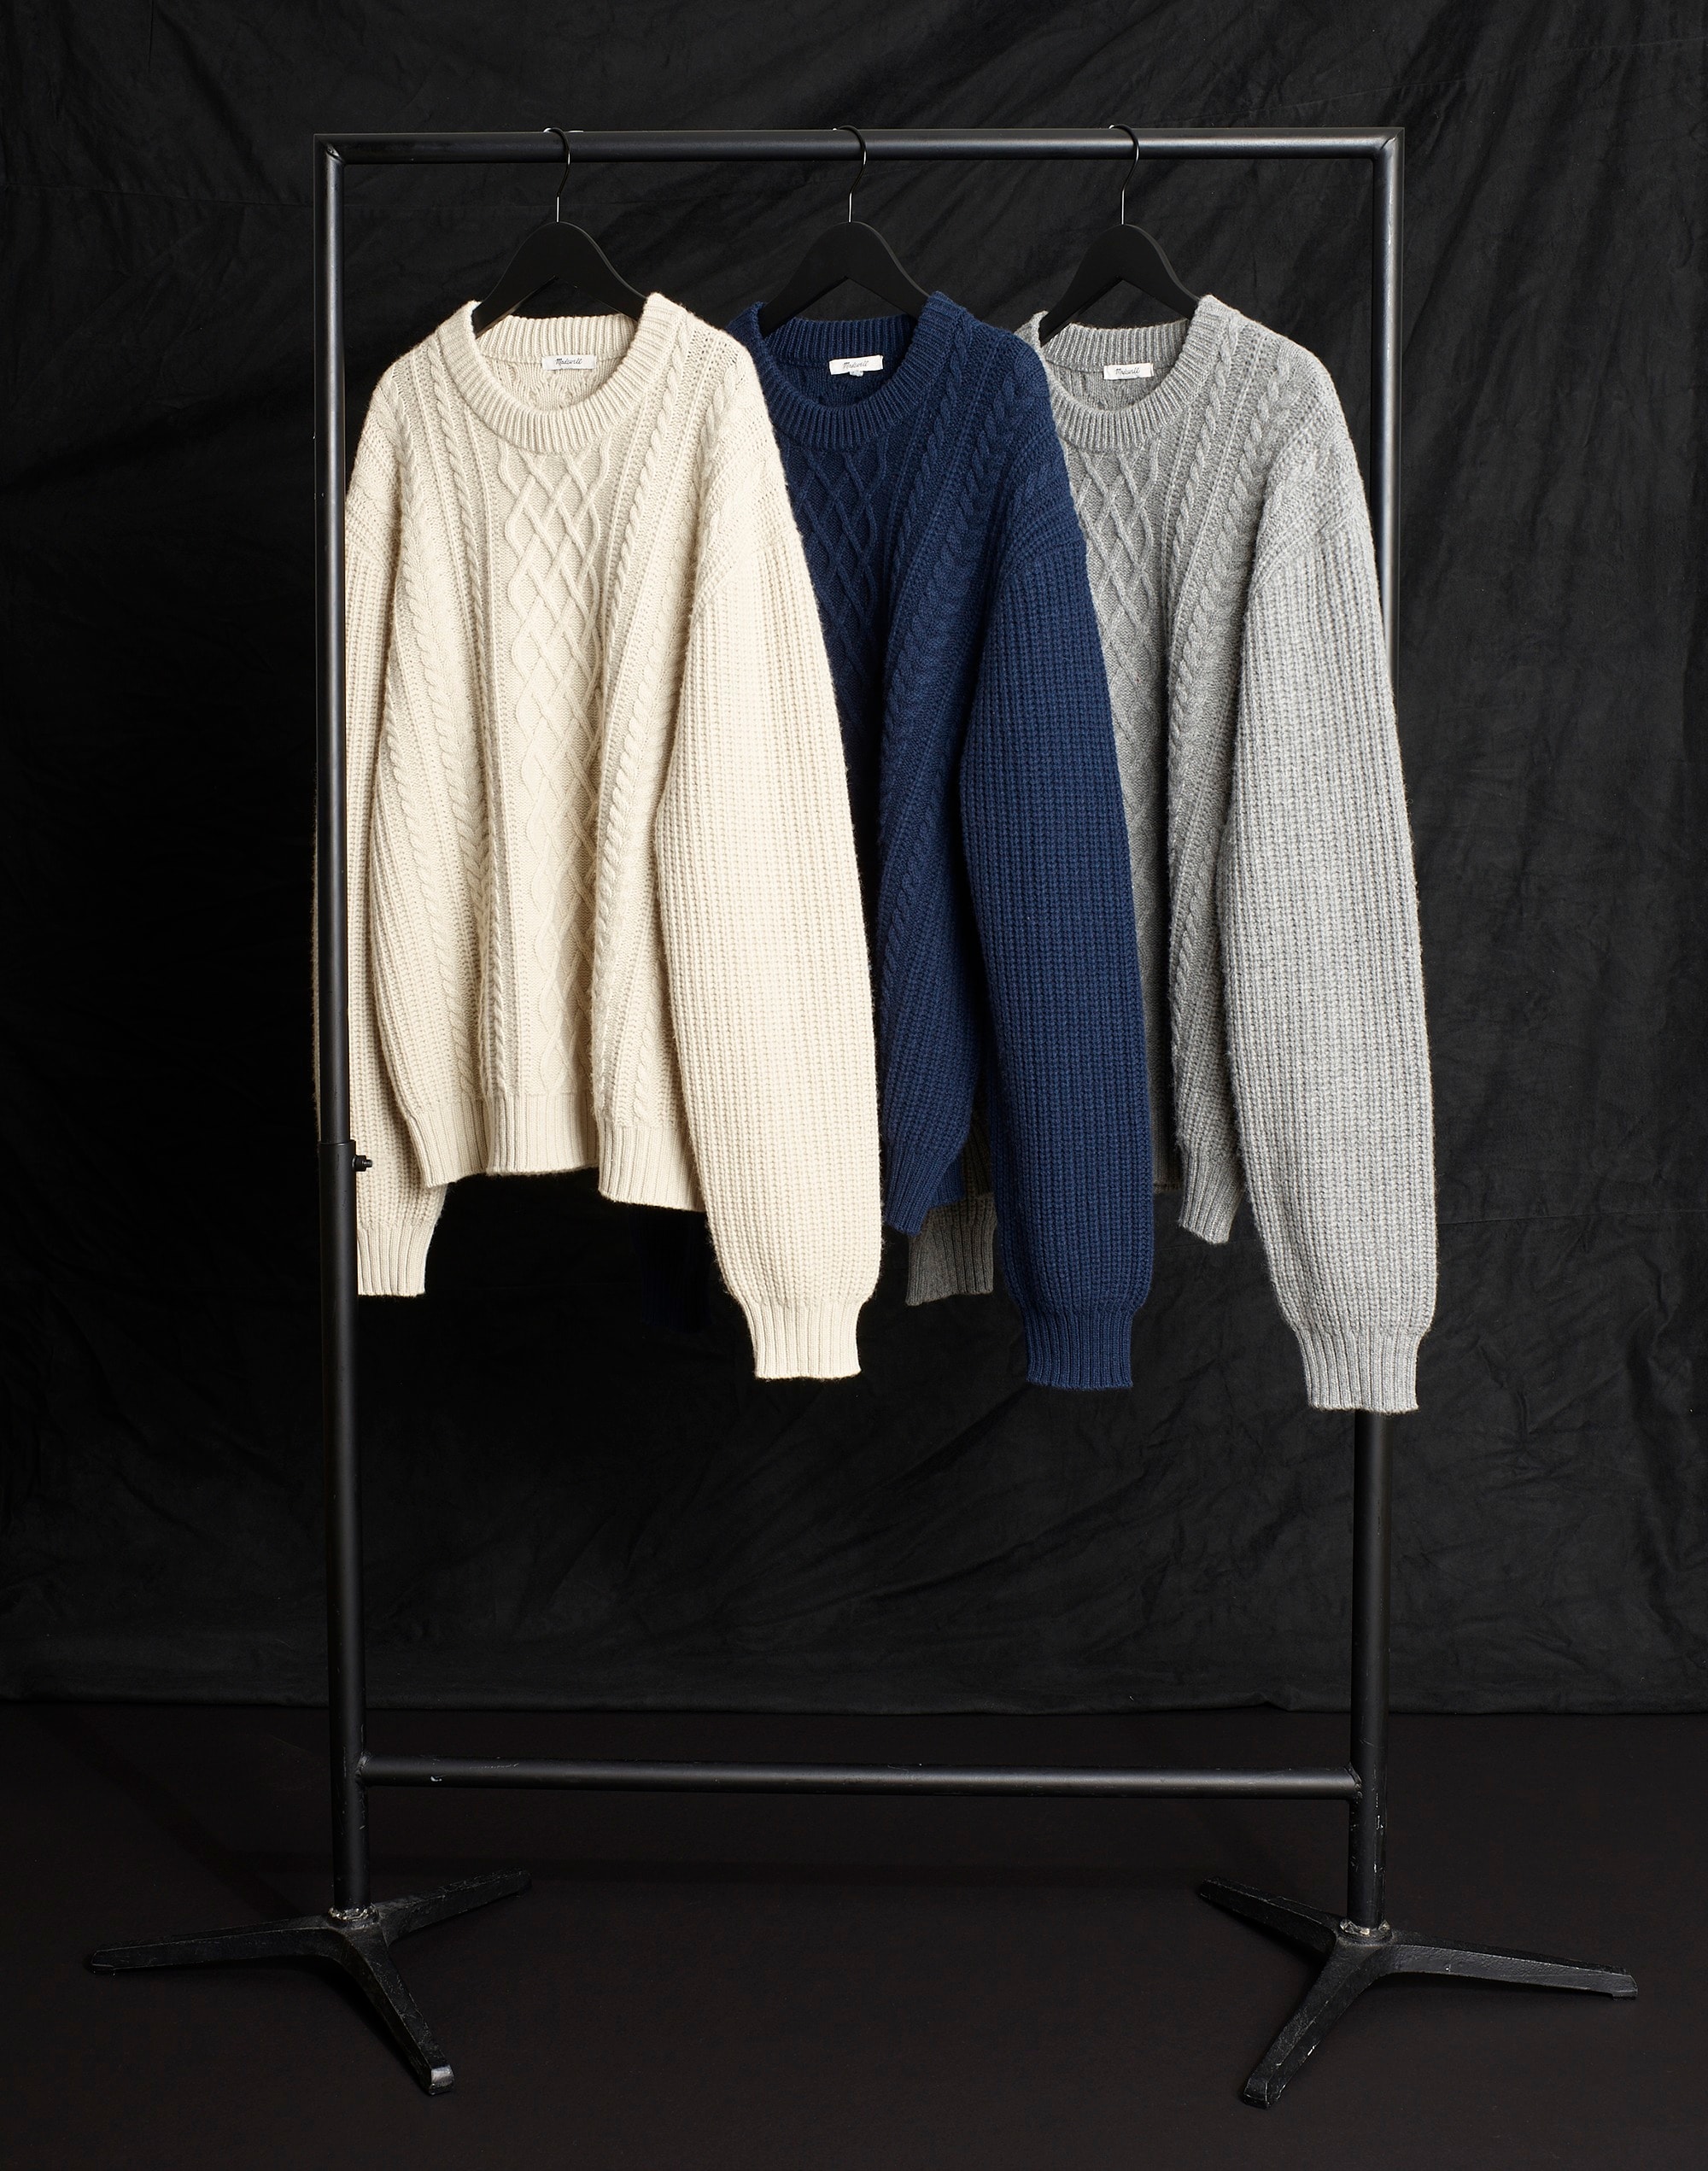 Cabled Crewneck Sweater